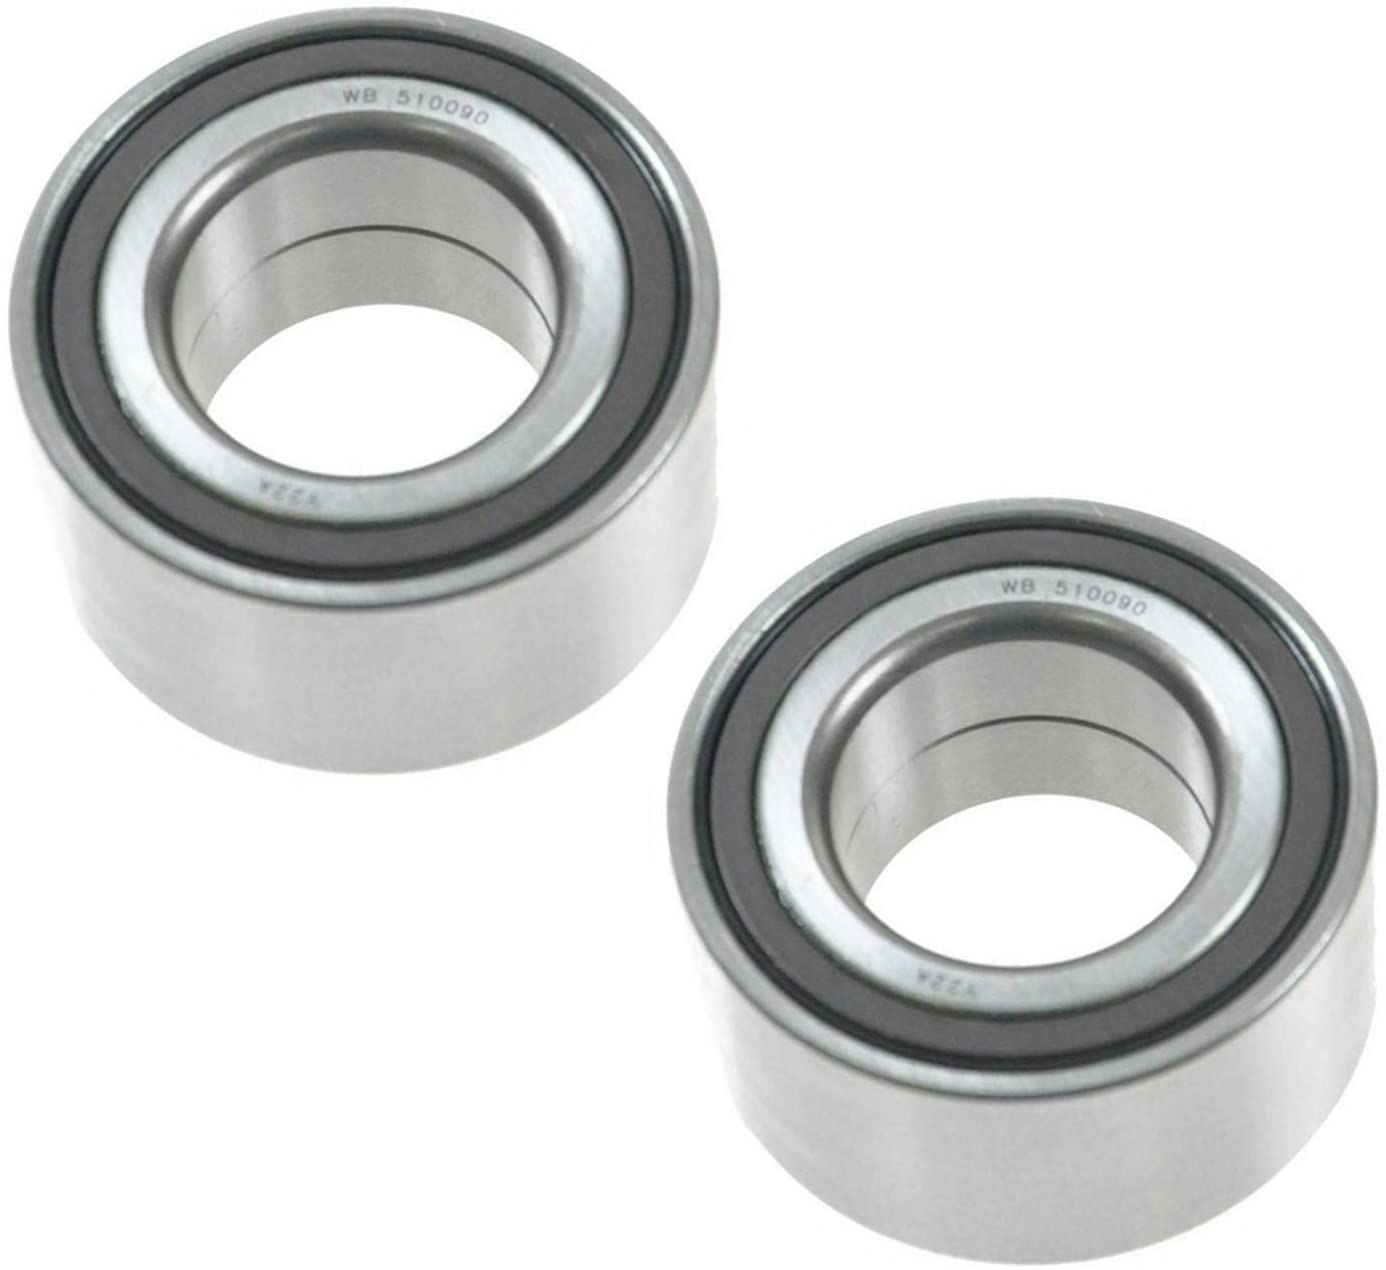 2x Front Wheel Bearing for 2007 2008 2009 2010